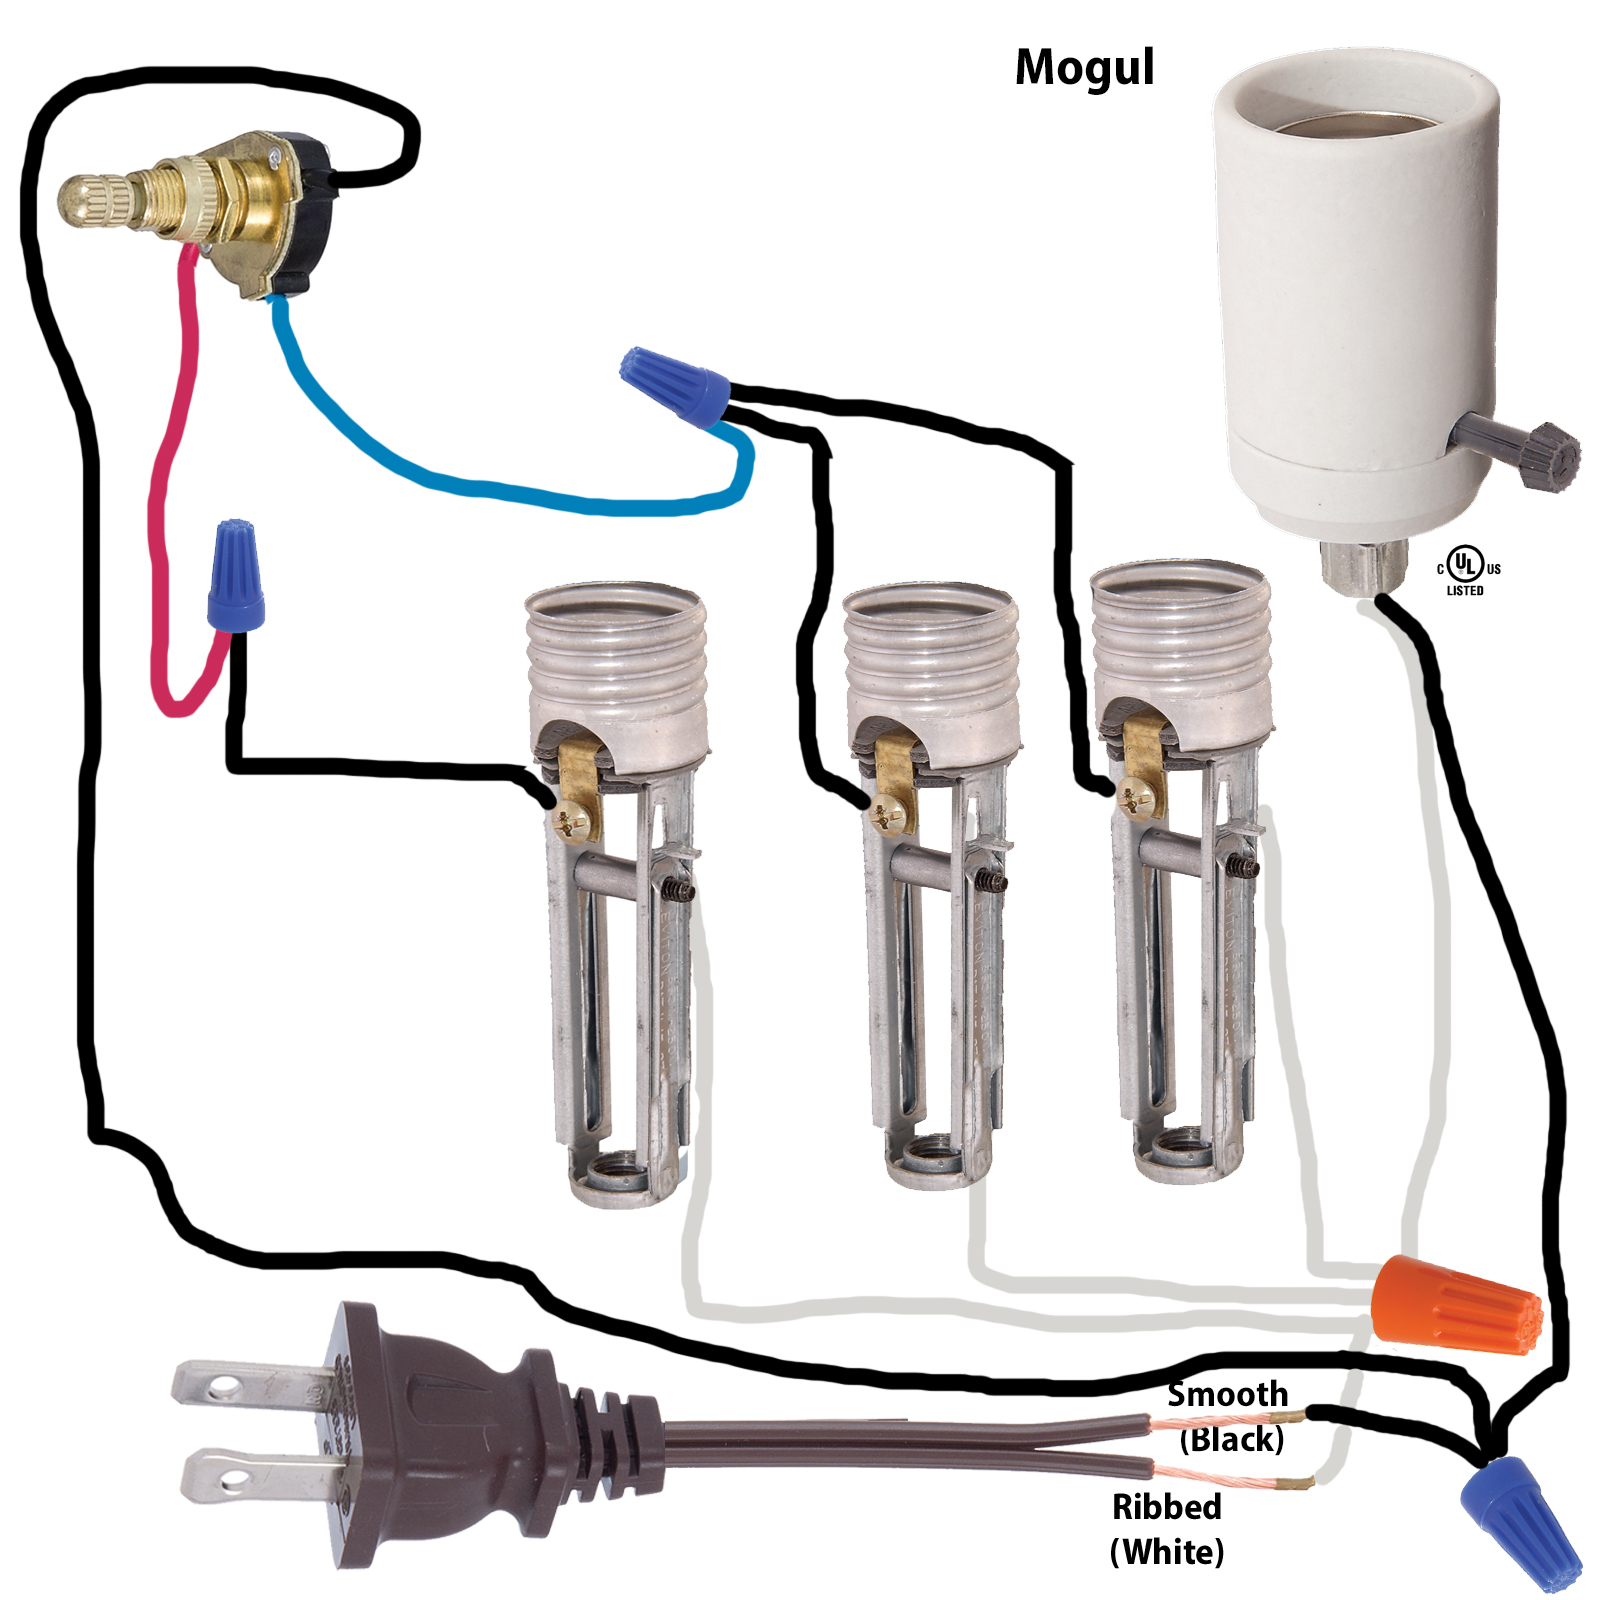 Lamp Parts and Repair | Lamp Doctor: Floor Lamp With Mogul Socket and 3 Way Switch Wiring Diagram